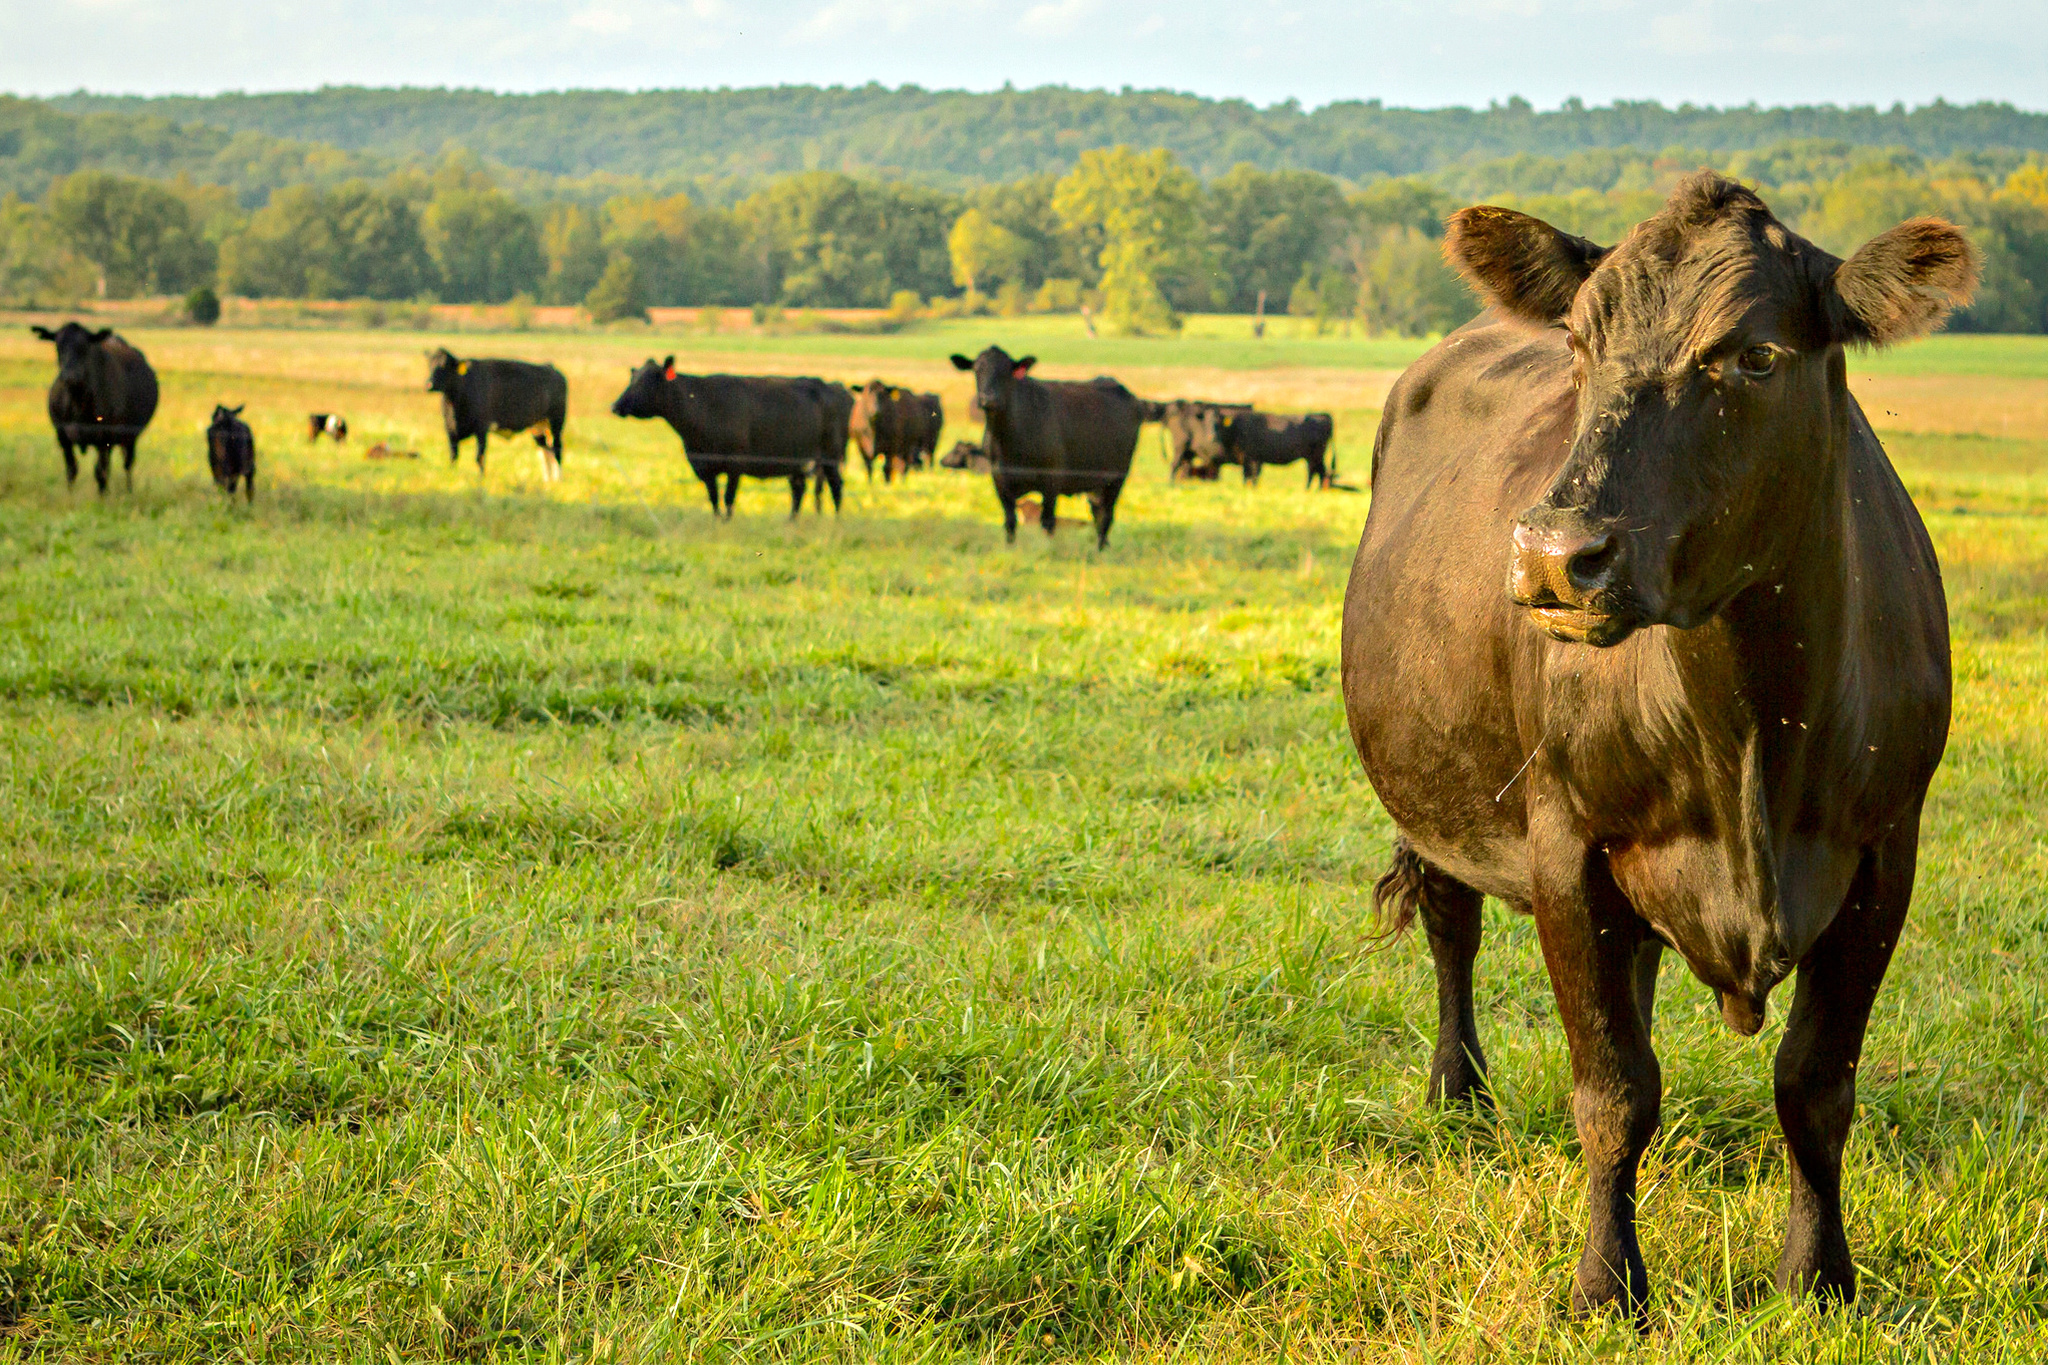 Grass-Fed Beef Will Not Help Tackle Climate Change, Report Finds